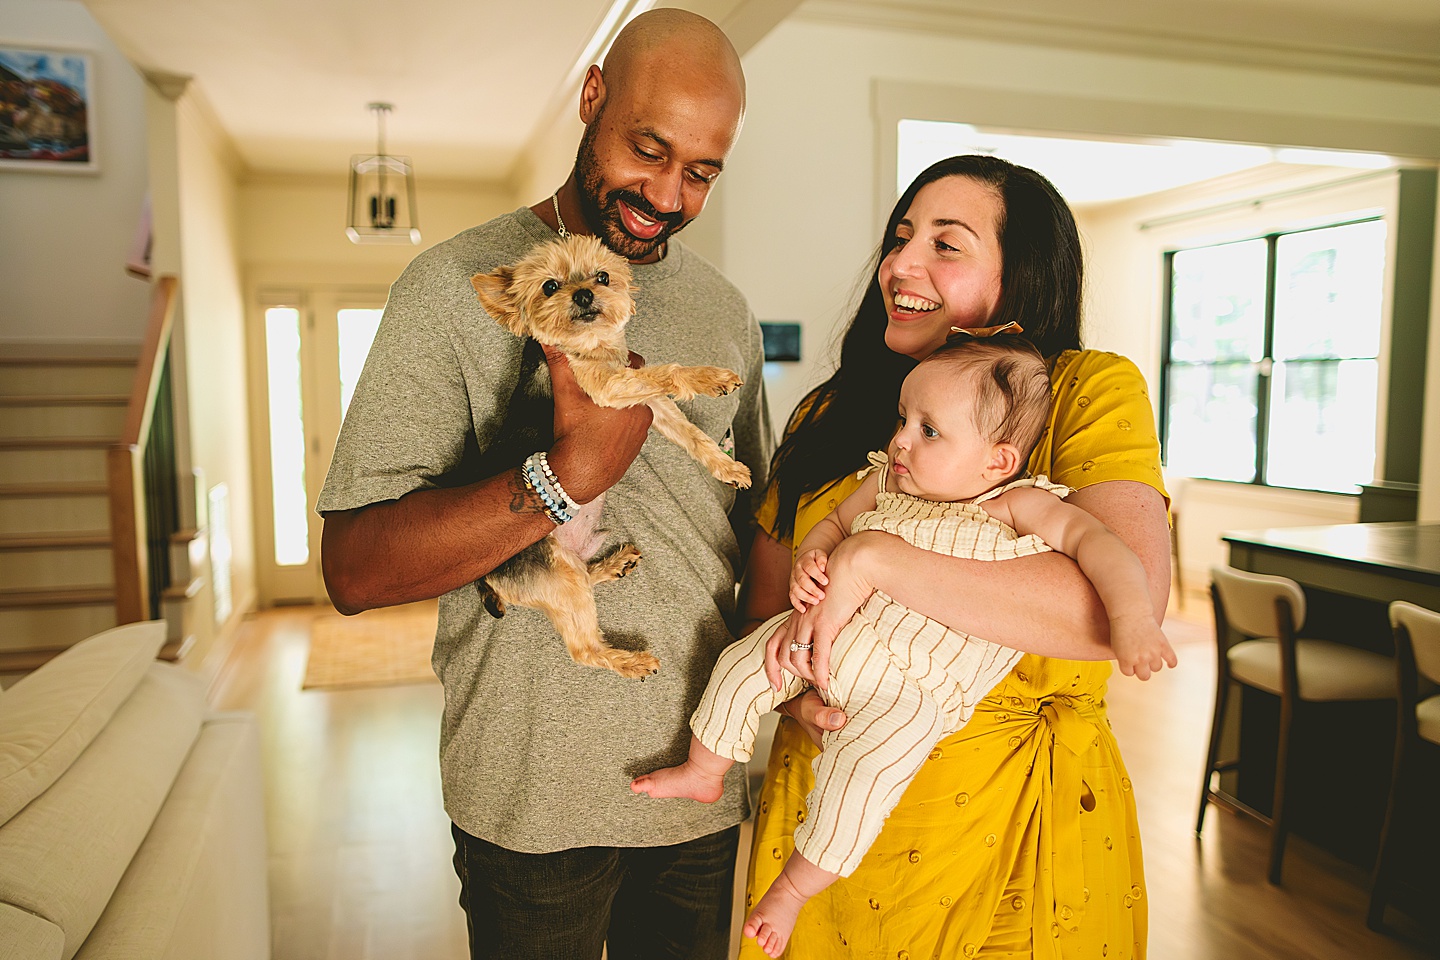 Family portrait with baby and dog